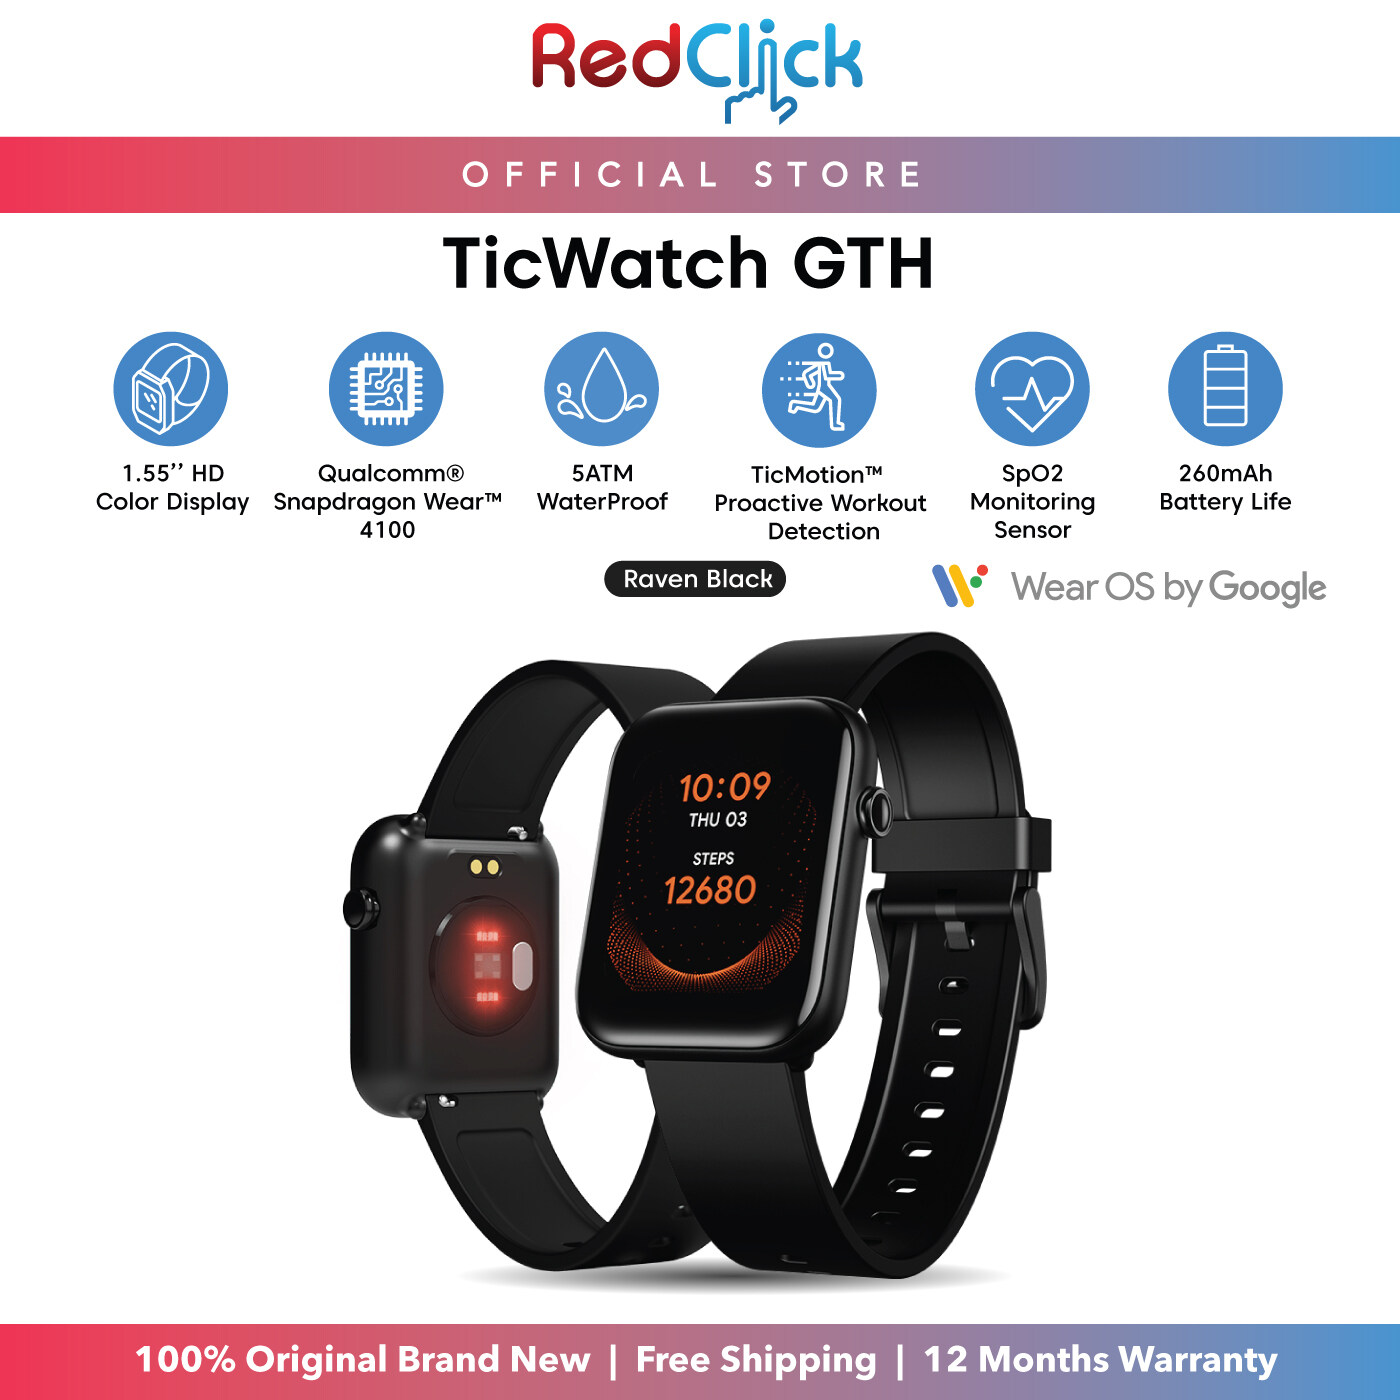 Mobvoi TicWatch GTH 1.55" HD Color Display 5ATM Waterproof Compatible With Mobvoi App